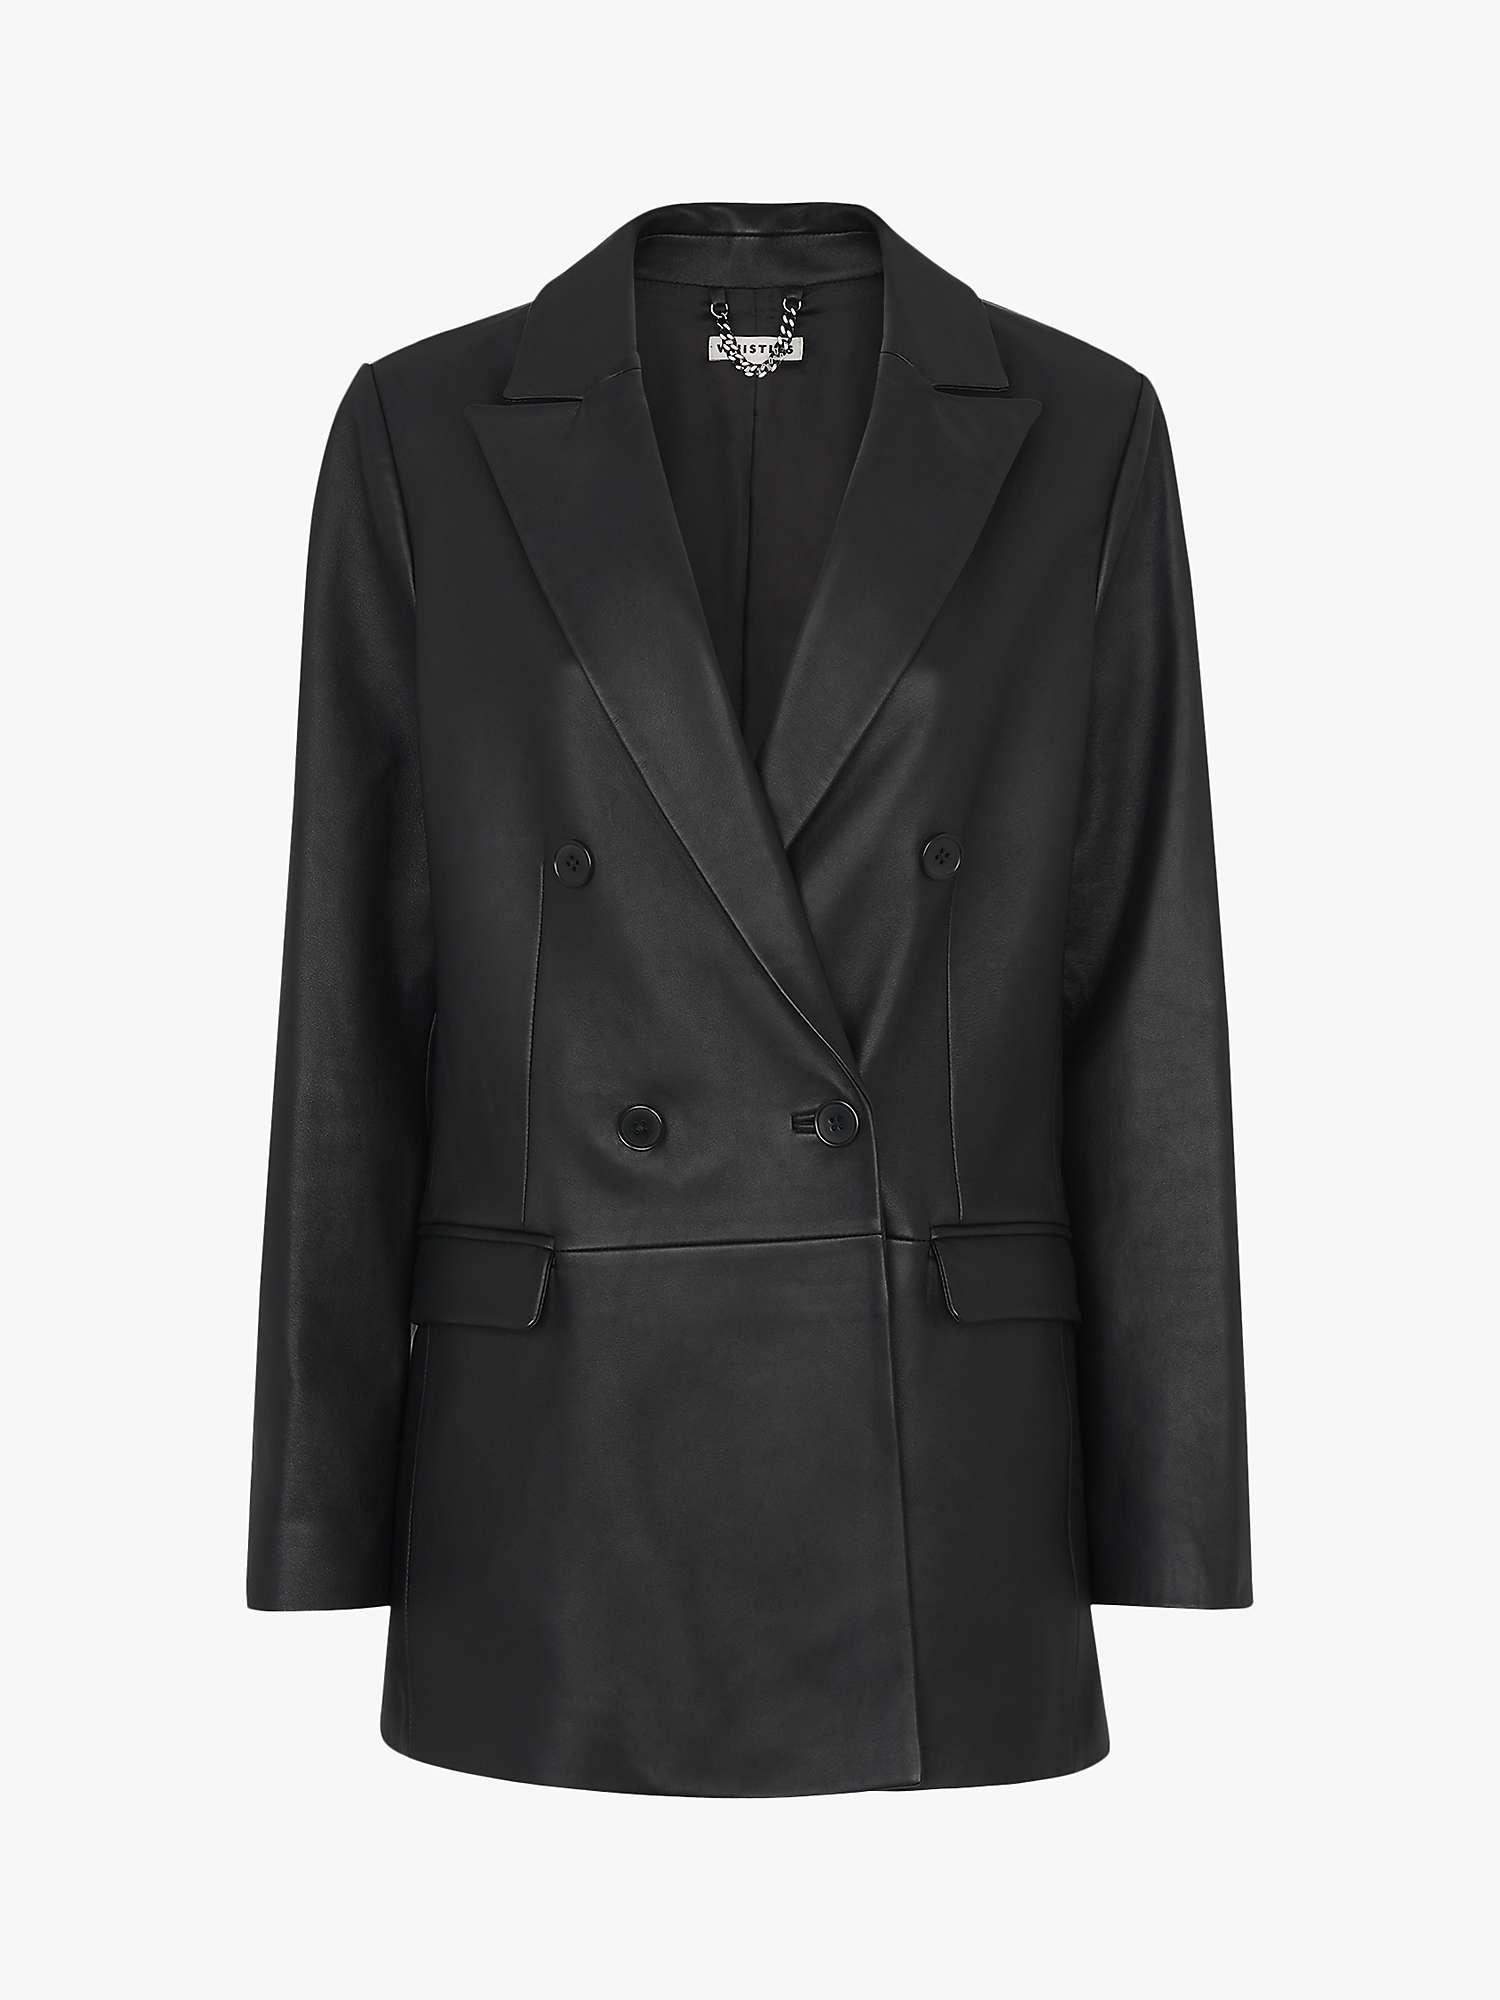 Buy Whistles Aliza Leather Double Breasted Blazer Jacket, Black Online at johnlewis.com